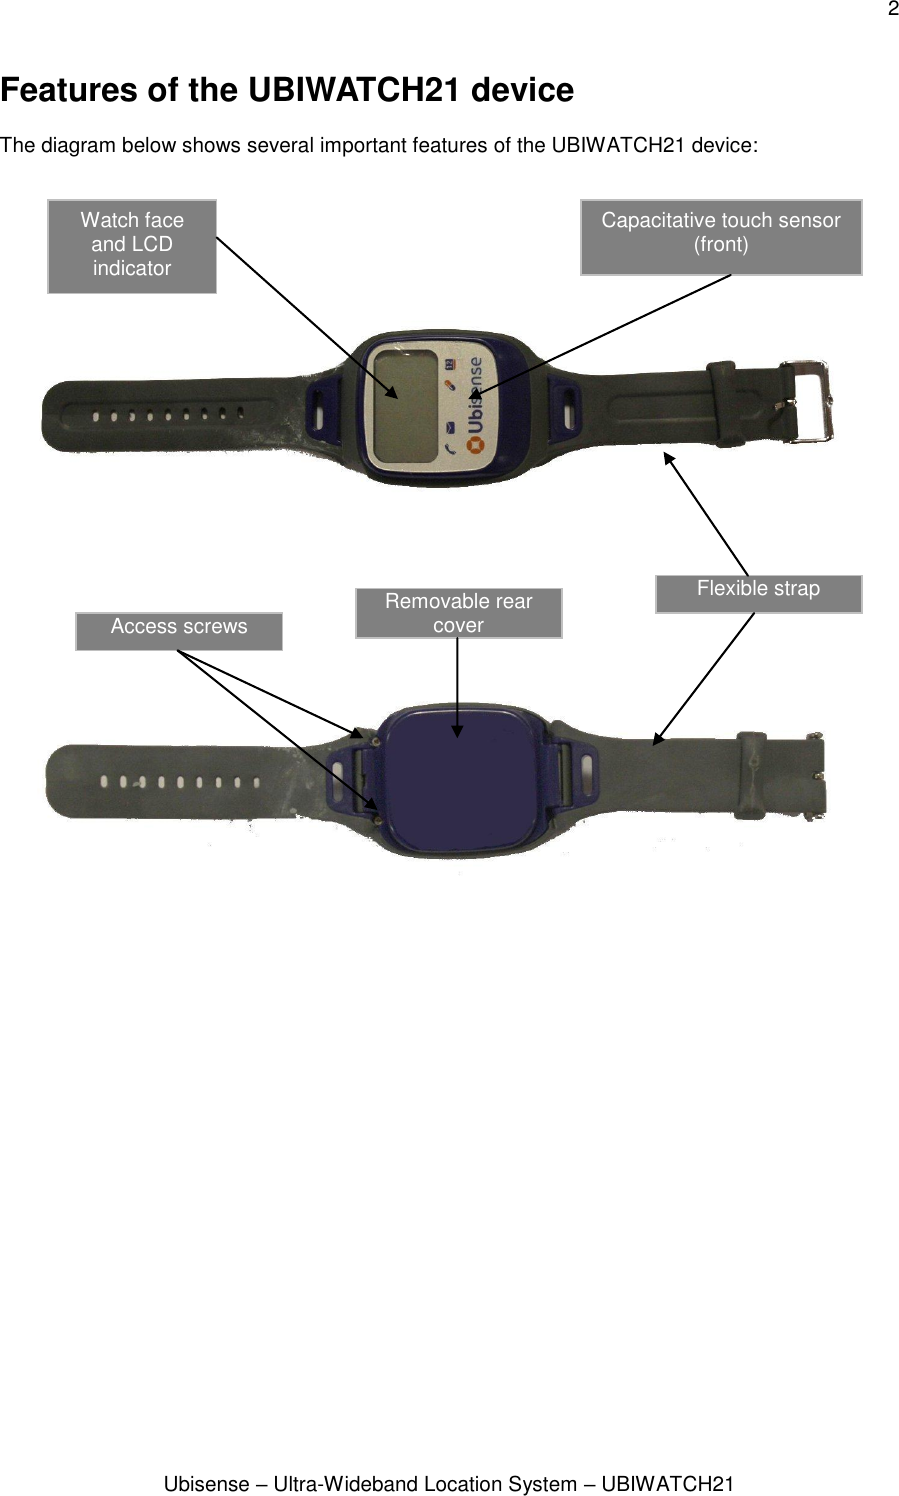 2 Ubisense – Ultra-Wideband Location System – UBIWATCH21 Features of the UBIWATCH21 device  The diagram below shows several important features of the UBIWATCH21 device:      Capacitative touch sensor (front) Watch face and LCD indicator Flexible strap Access screws Removable rear cover 